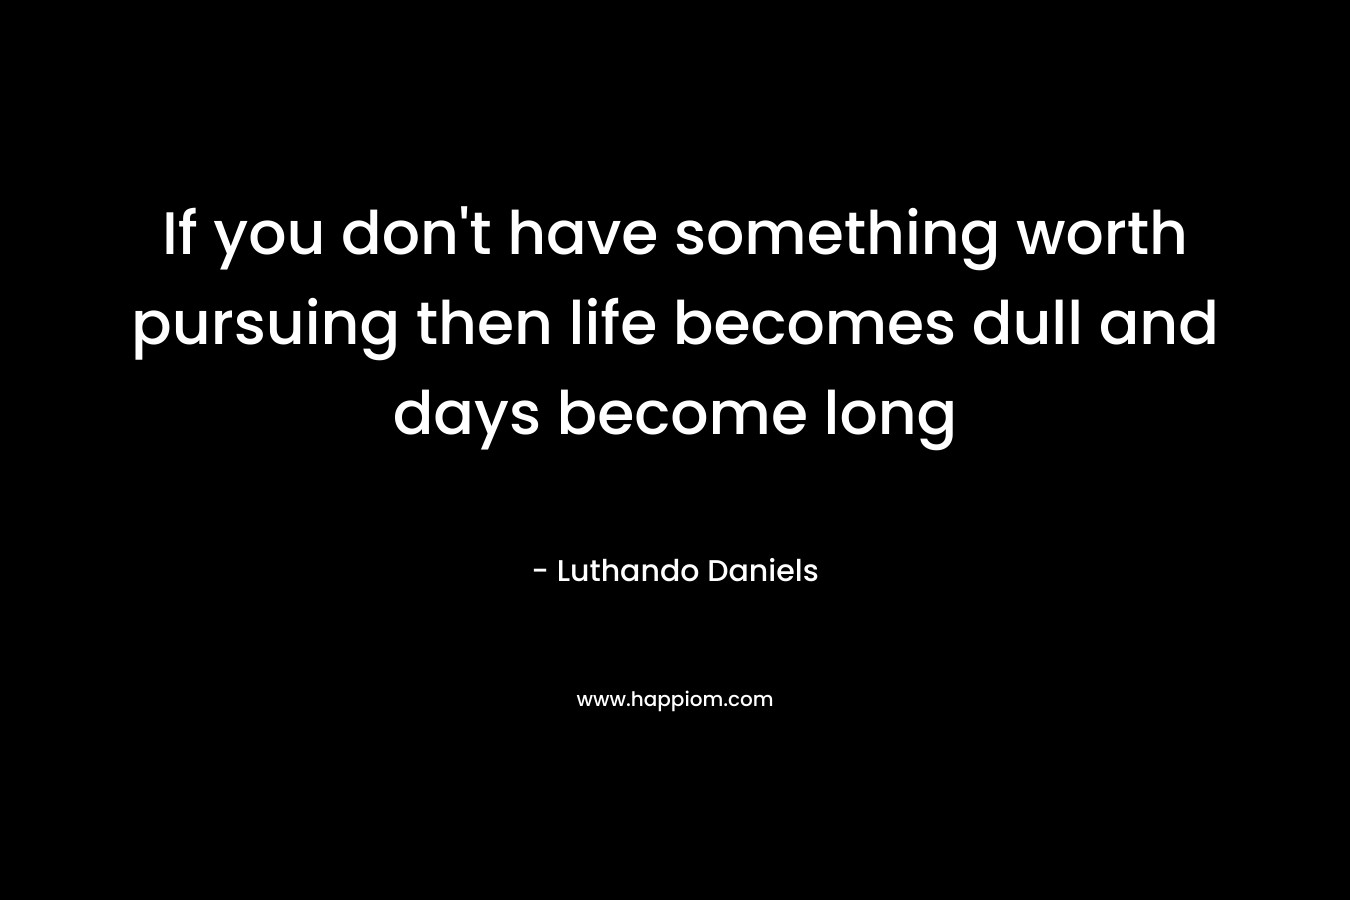 If you don’t have something worth pursuing then life becomes dull and days become long – Luthando Daniels